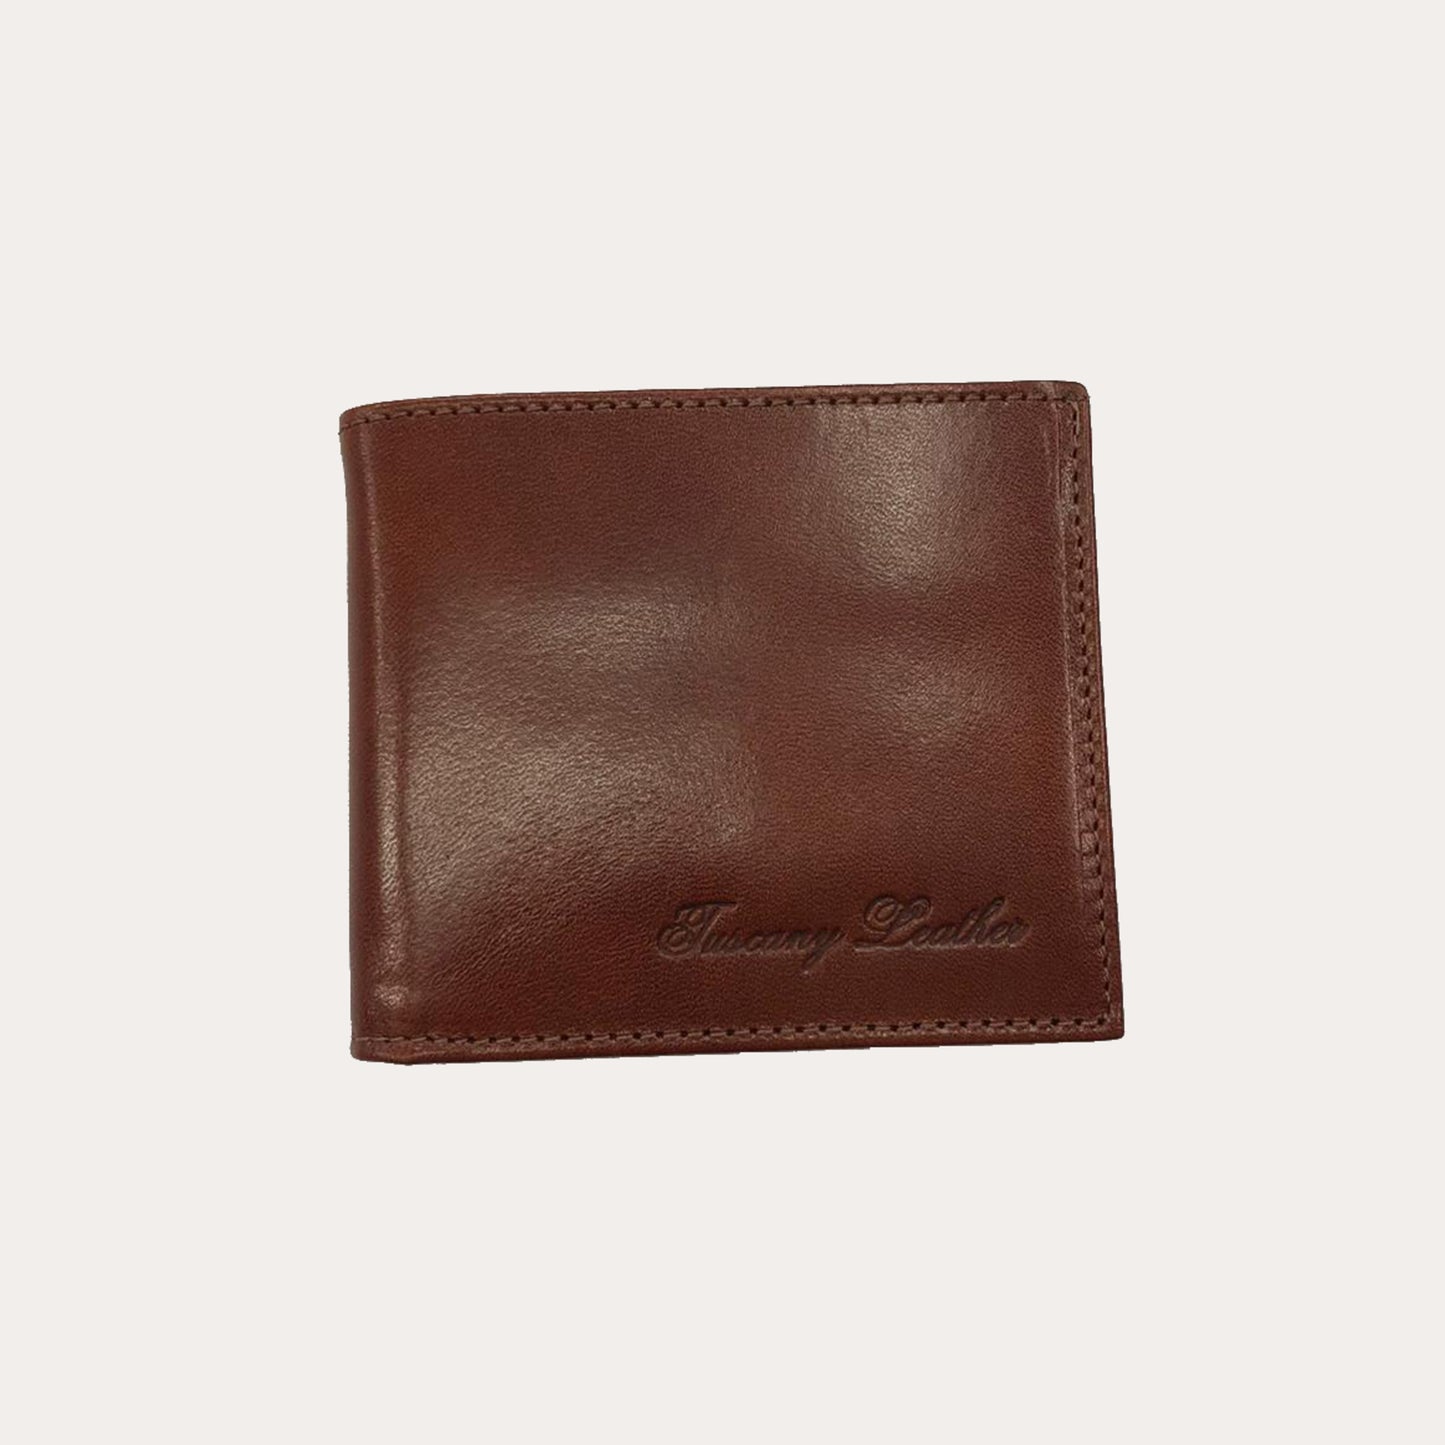 Tuscany Leather Brown Leather Wallet